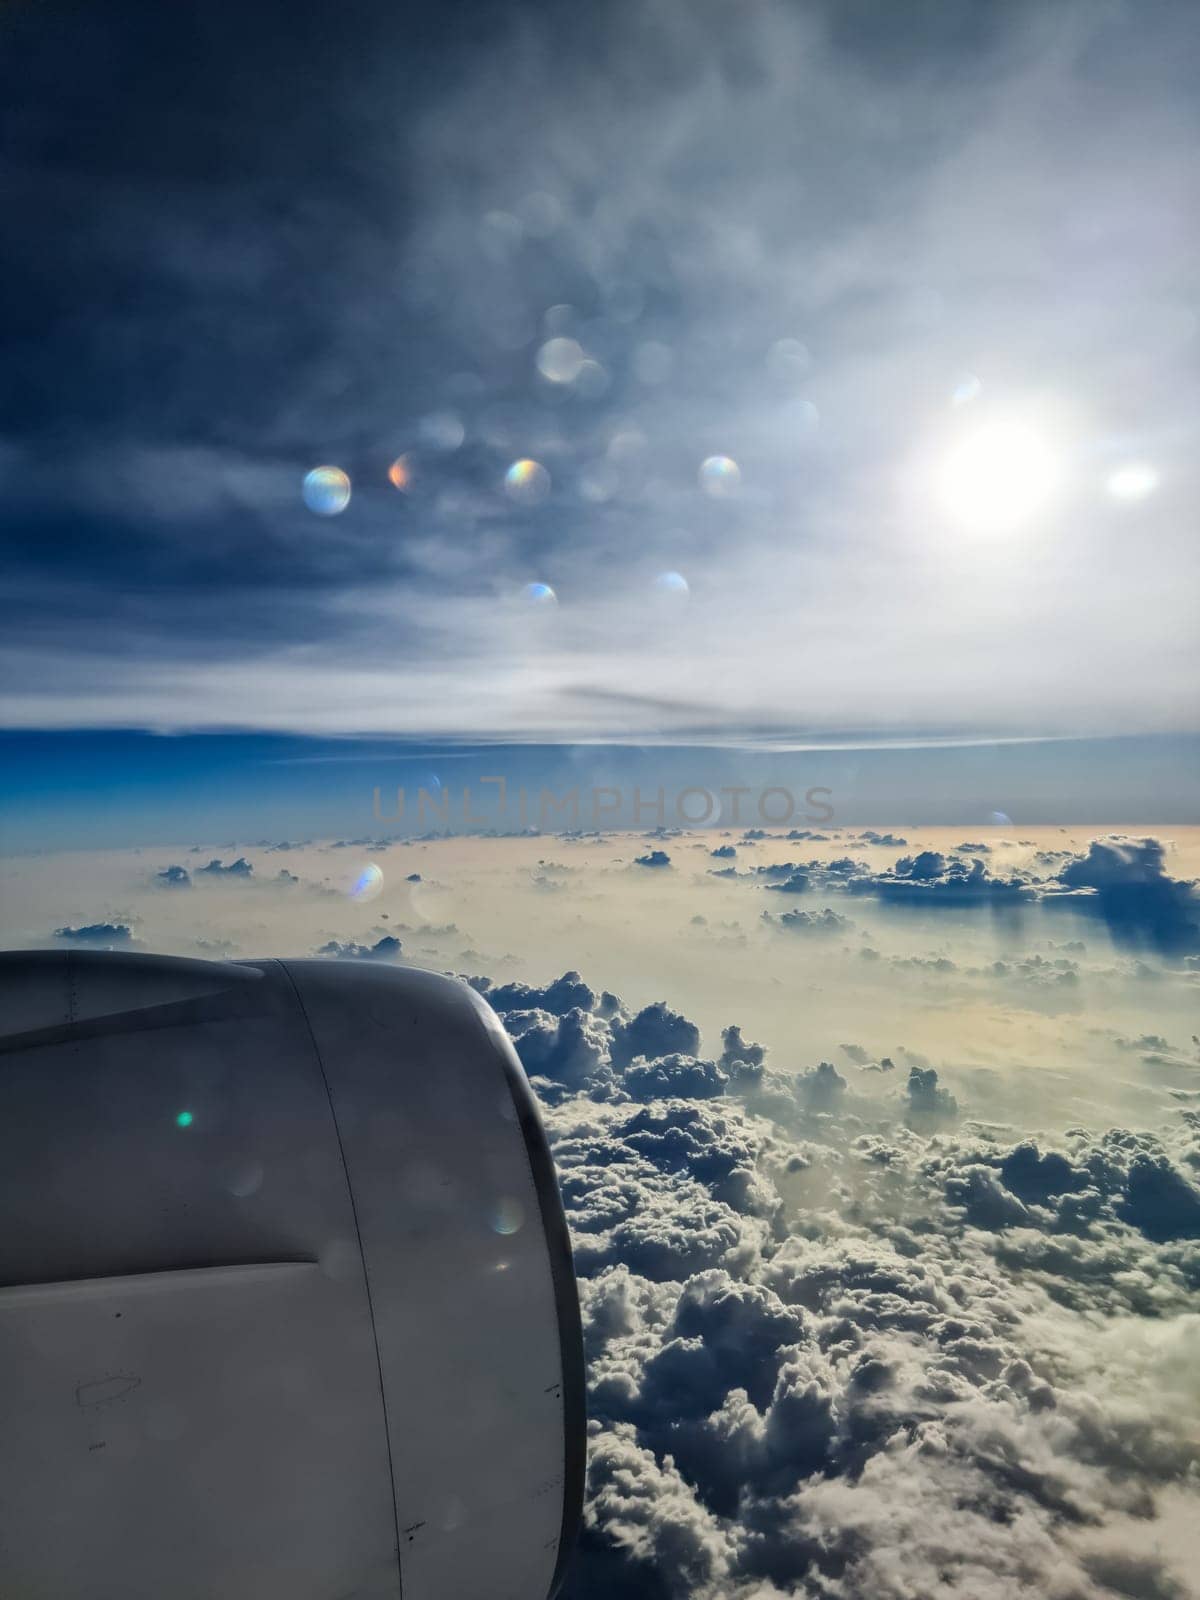 View from an airplane window of the sun and great cloud formations with many small spots on the window. by MP_foto71